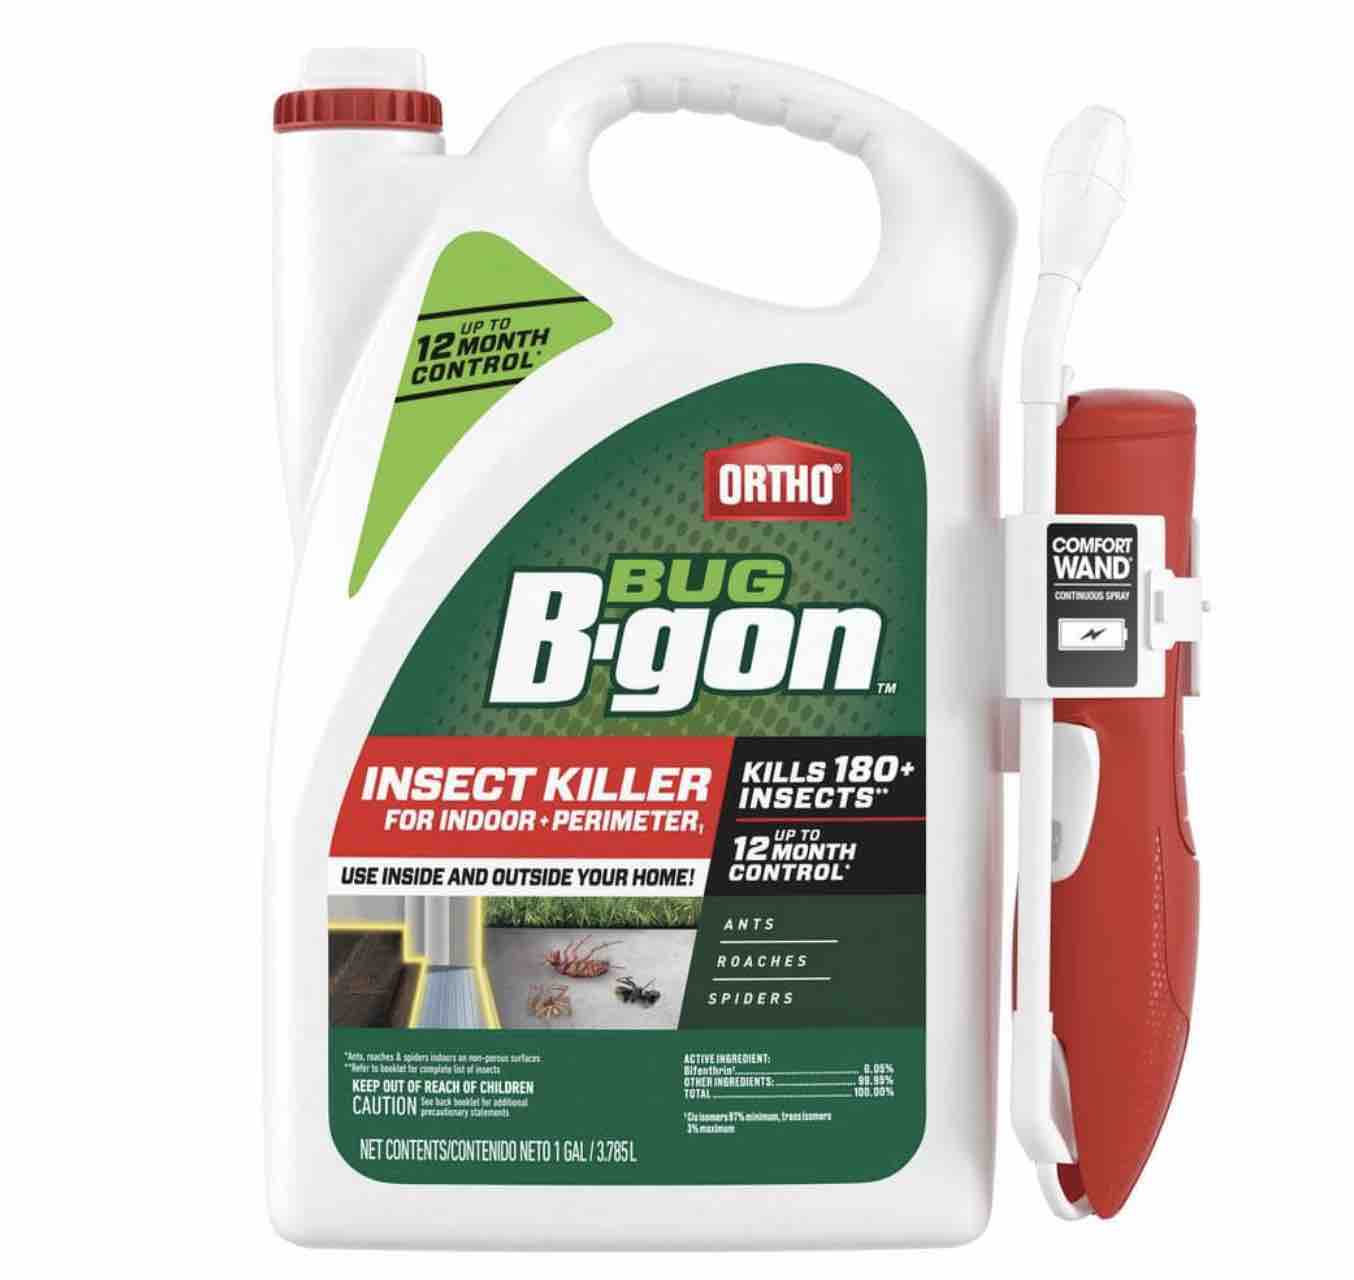 Control Bug Problems to create cozy outdoor space with Ortho 1 Gal. Wand Bgon Insect Killer